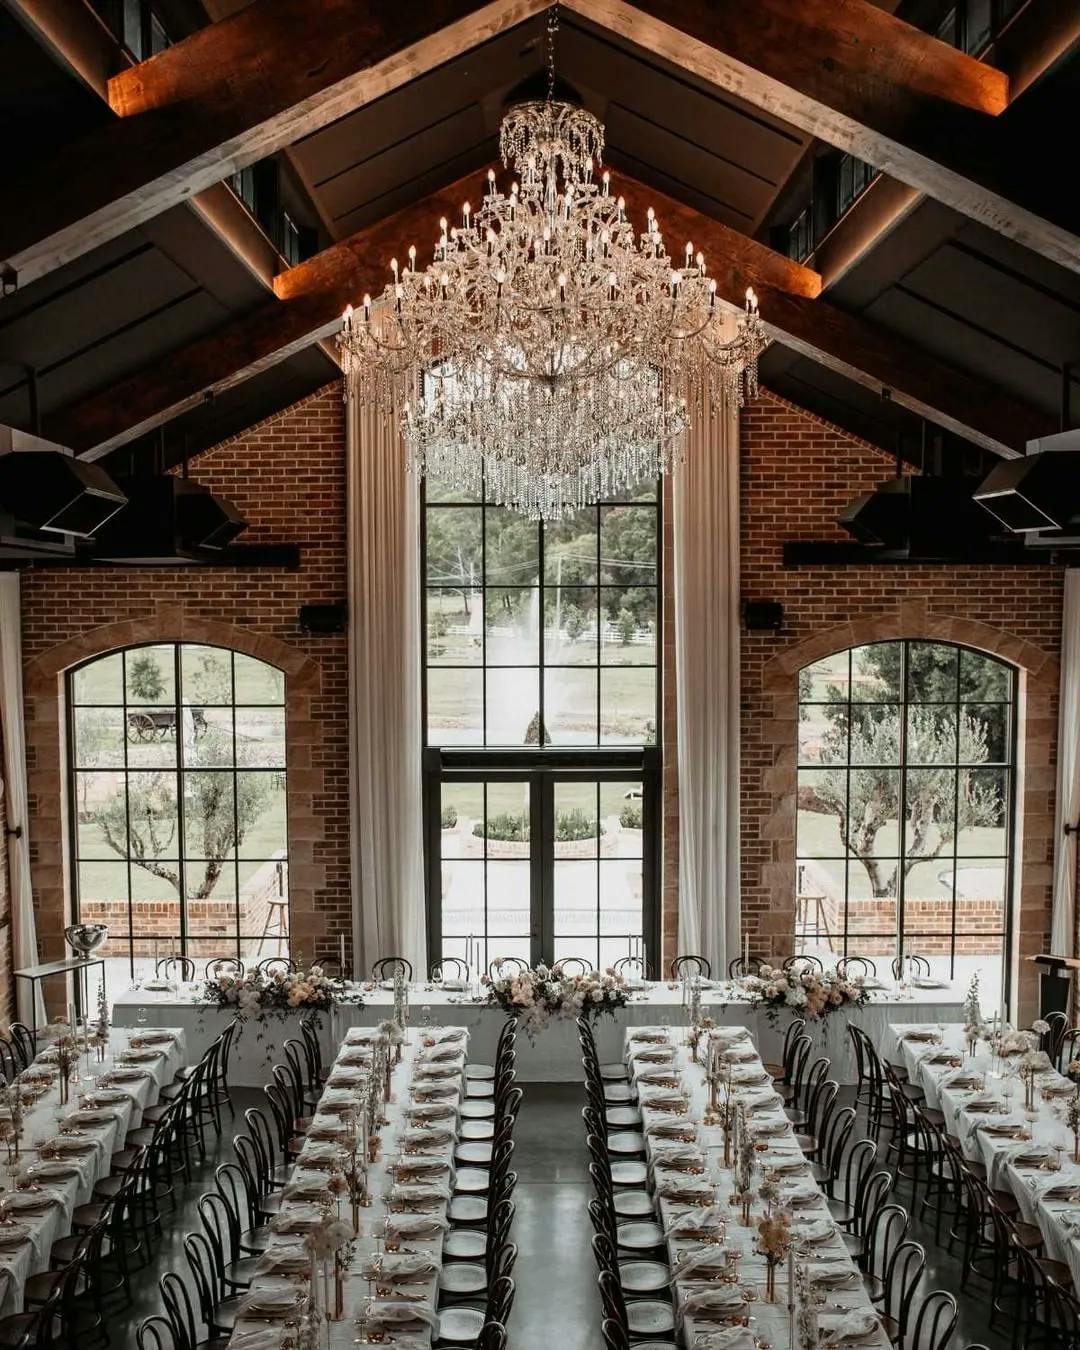 A beautifully decorated reception hall with long, white-draped tables arranged in parallel rows, adorned with floral centerpieces. Overhead, a large, ornate chandelier hangs from the high wooden-beamed ceiling. Tall windows let in natural light.